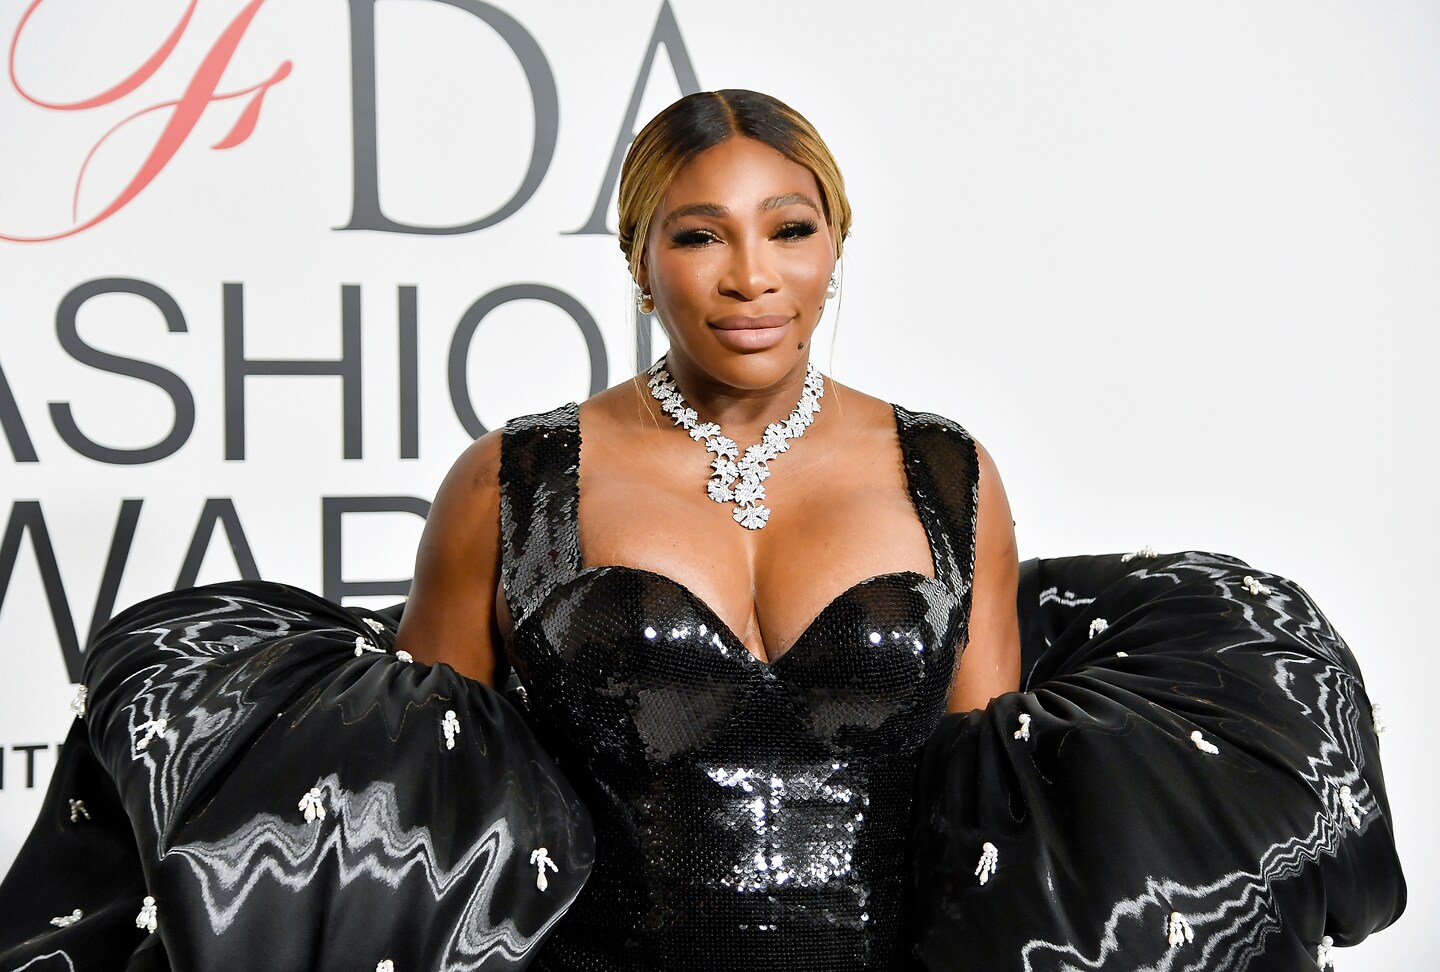 Tennis legend Serena Williams honored as ‘fashion icon’ at fashion industry’s big awards night